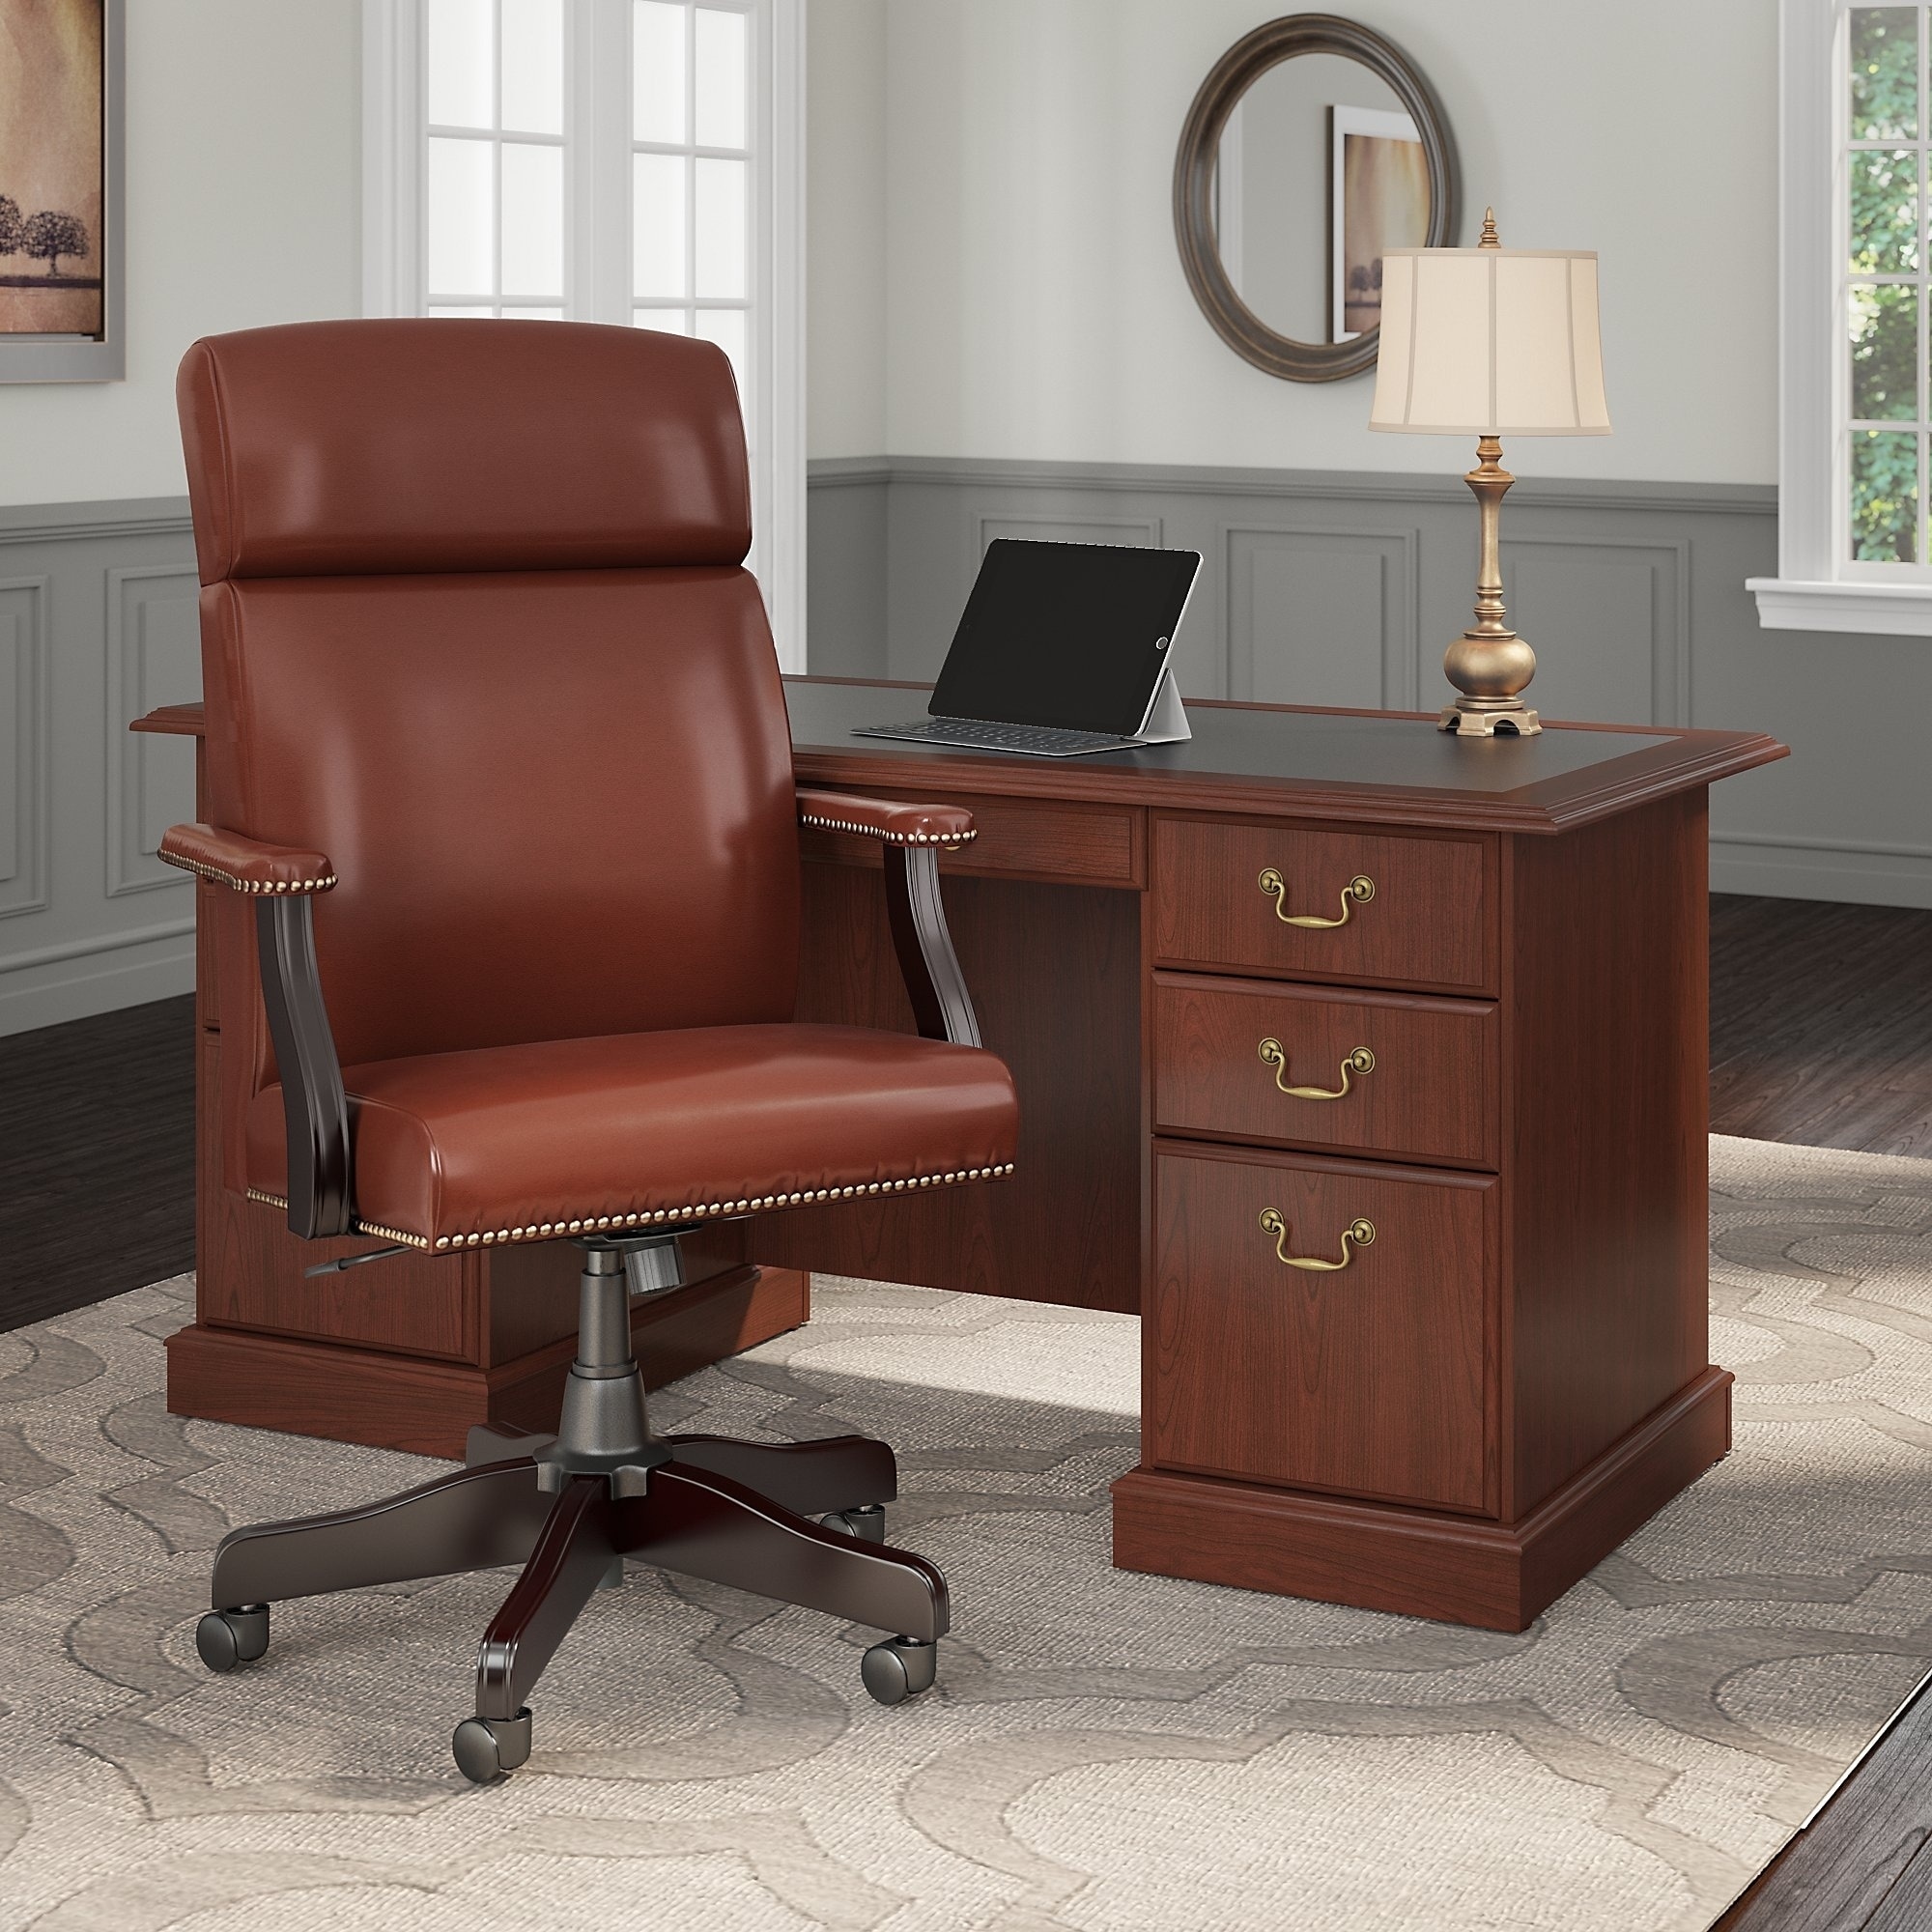 Shop Copper Grove Dobrich Executive Desk With High Back Office